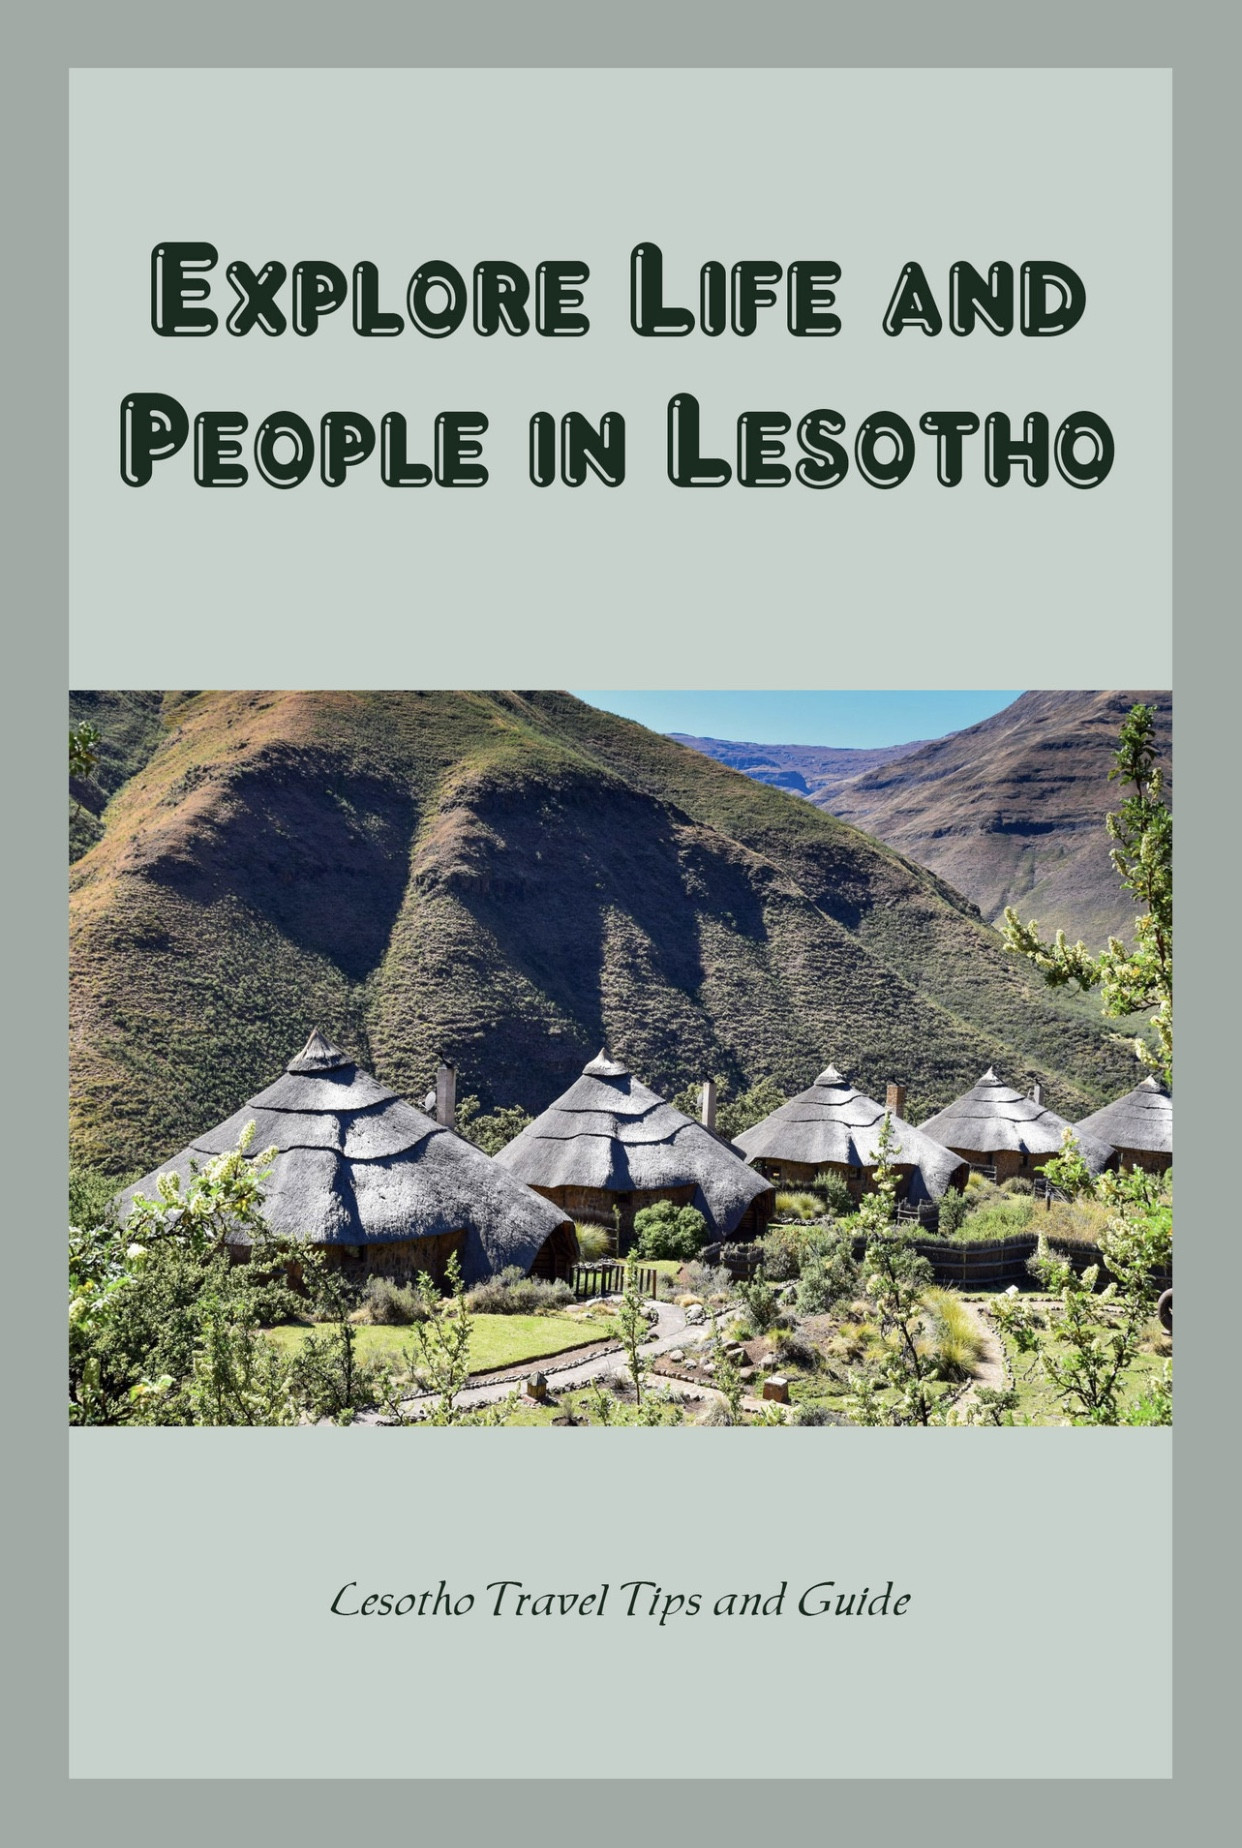 Explore Life and People in Lesotho